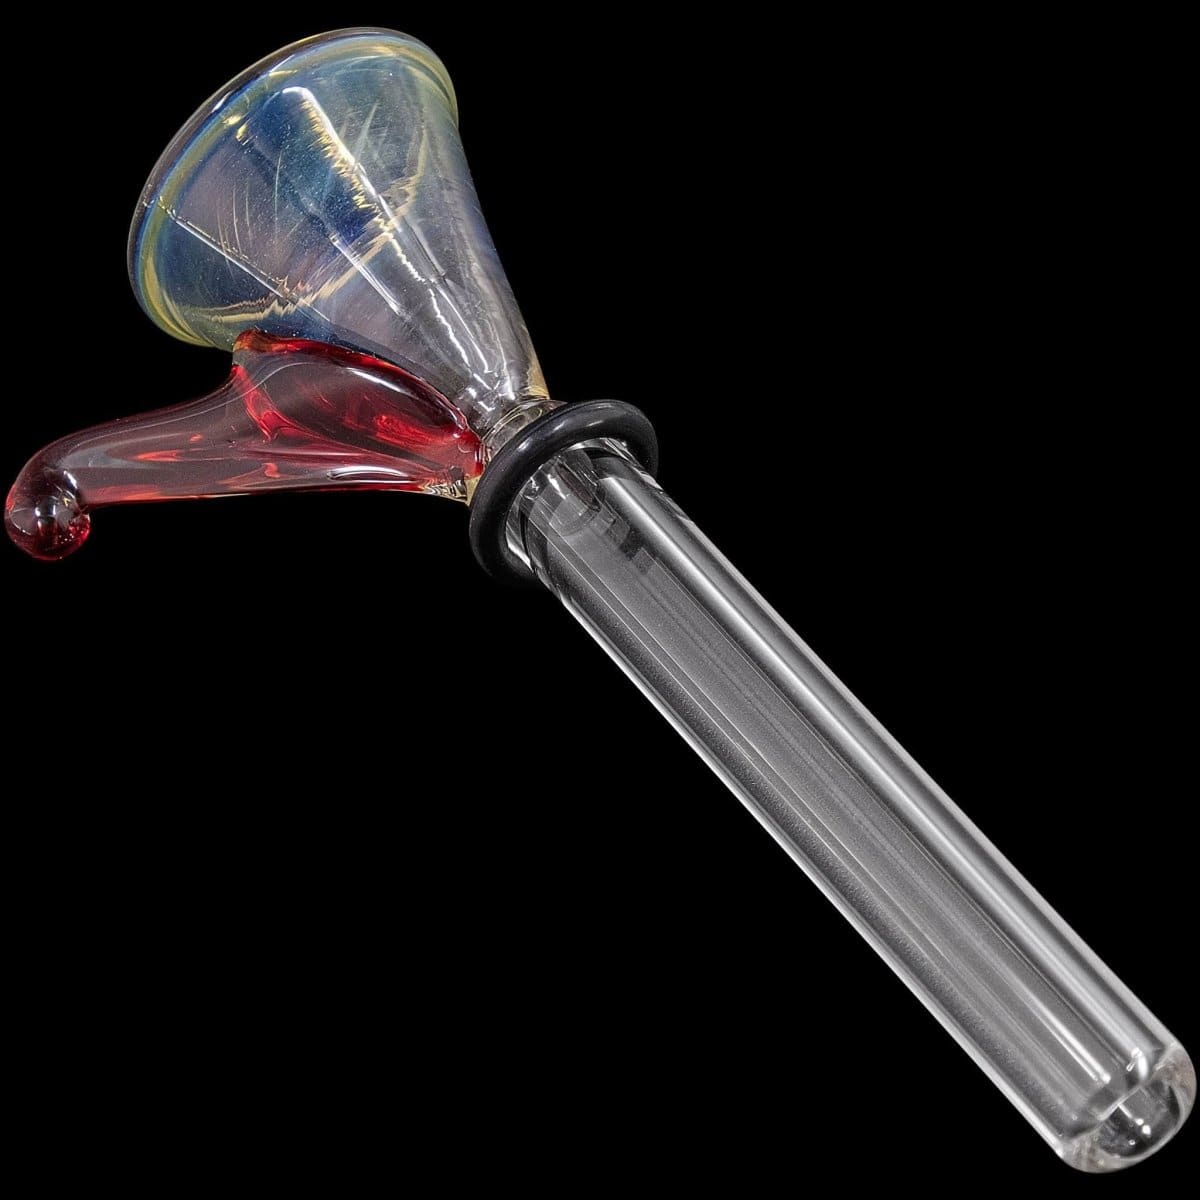 LA Pipes Smoking Accessory Red 9mm Funnel Slide Bowl with Handle for Pull-Stem Bongs